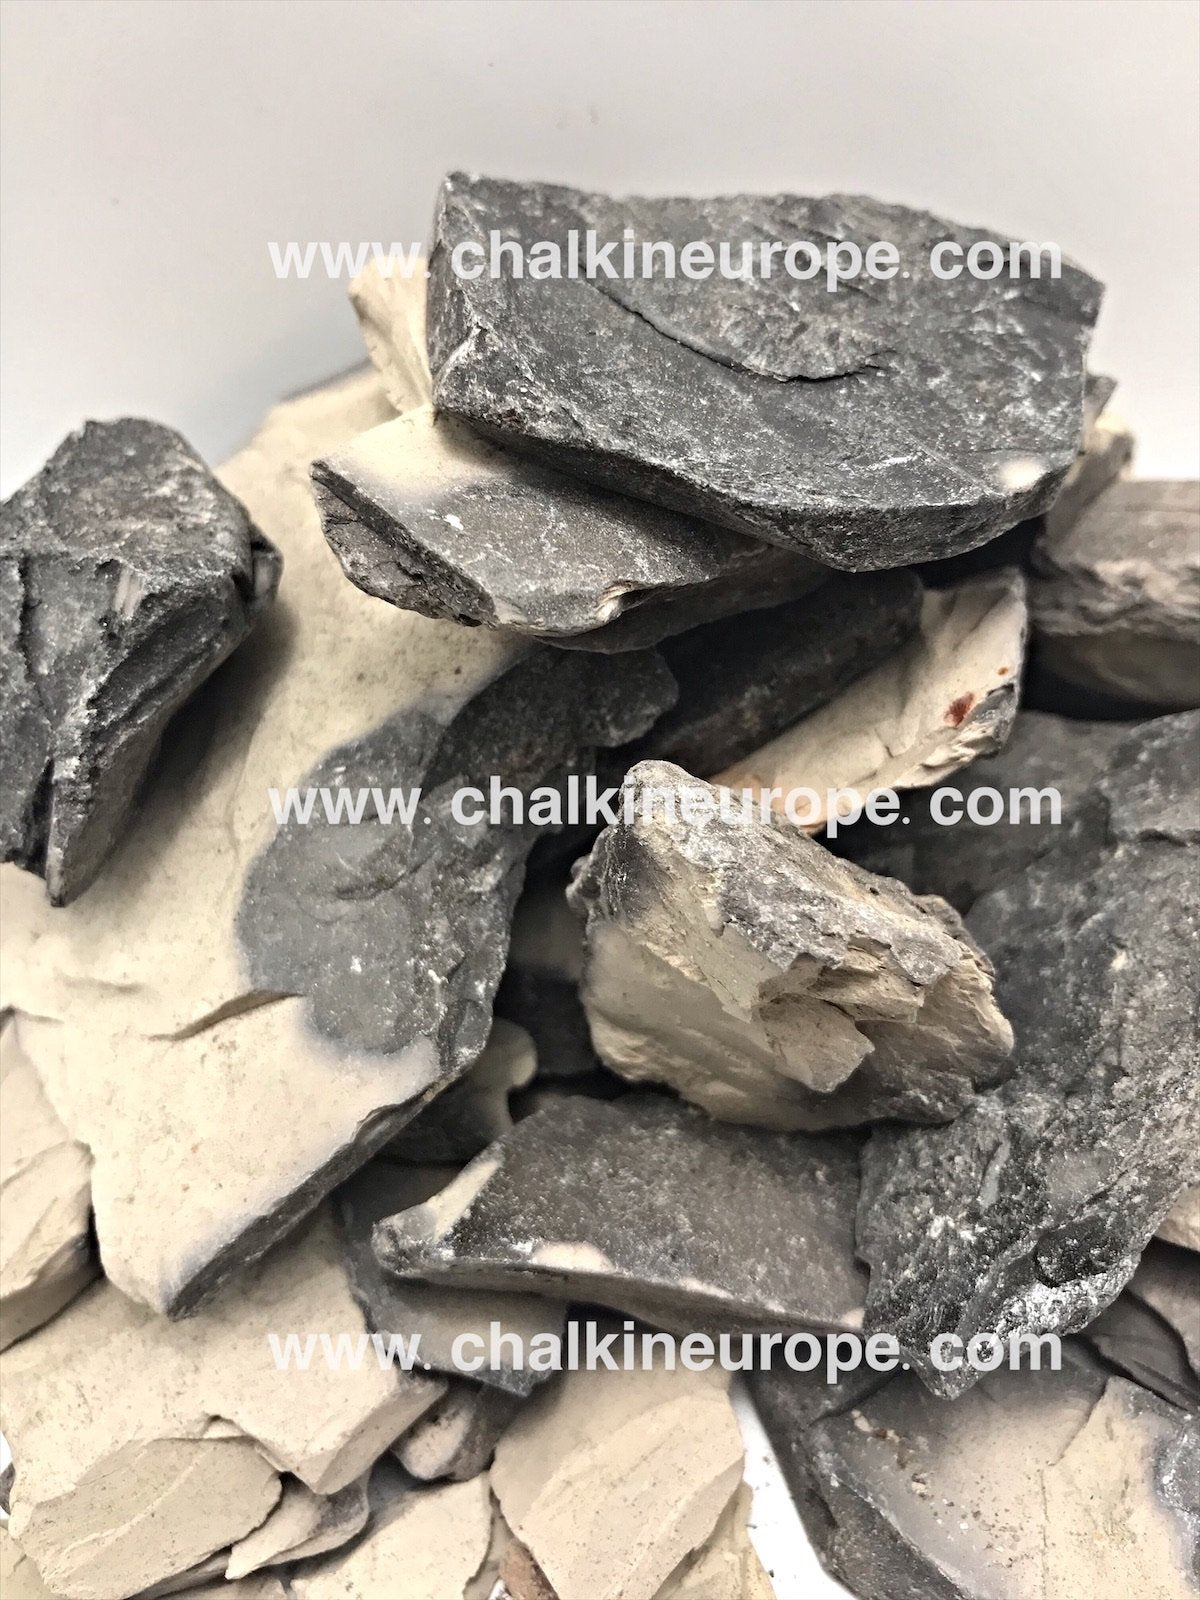 Butter Grey Clay - Chalkineurope